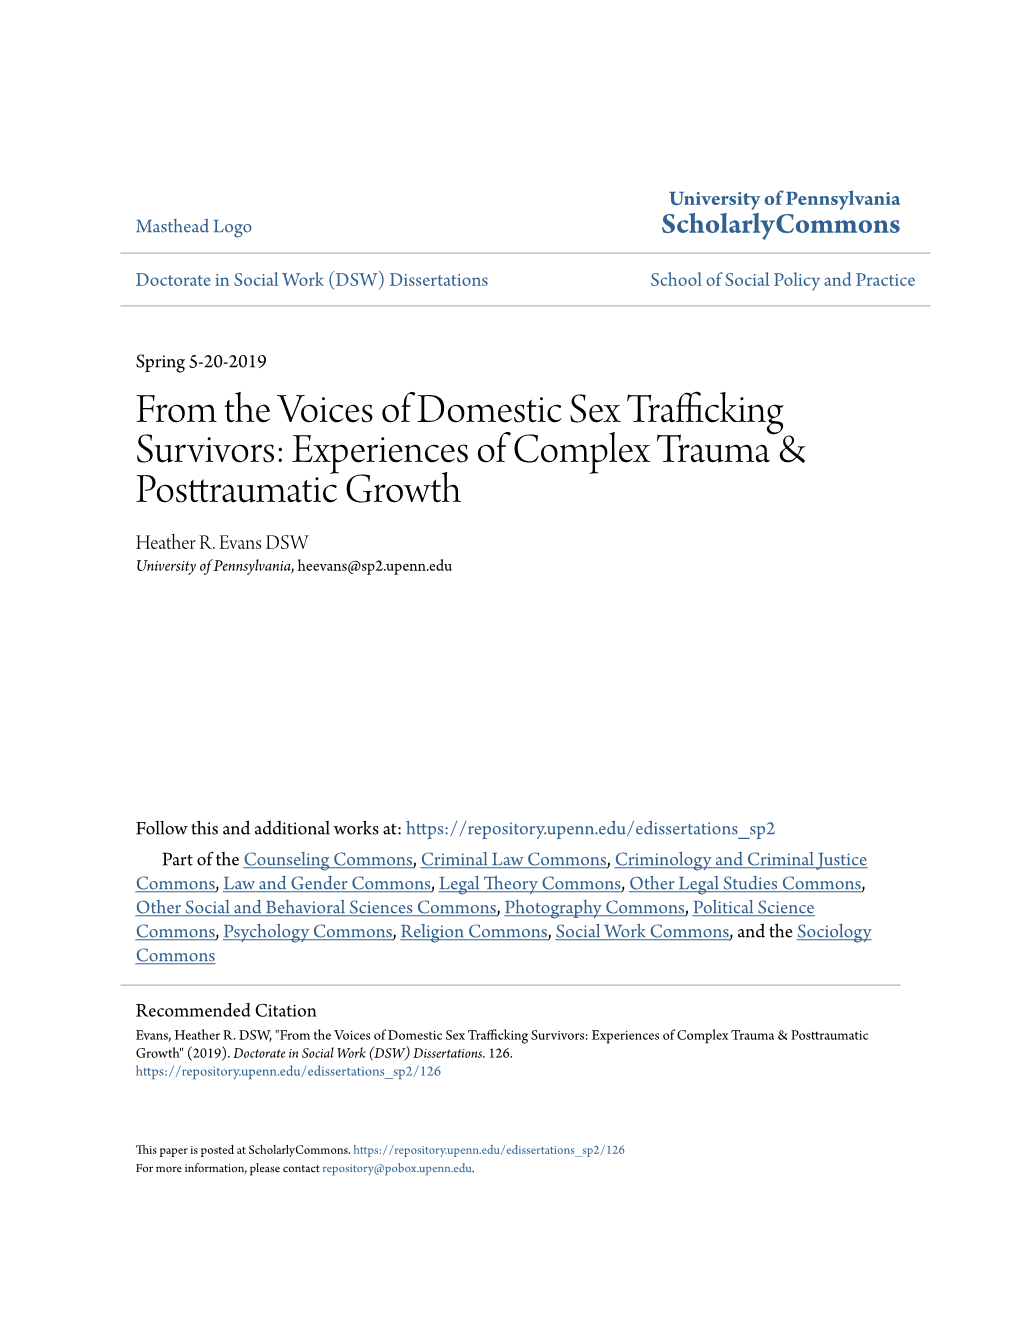 From the Voices of Domestic Sex Trafficking Survivors: Experiences of Complex Trauma & Posttraumatic Growth Heather R